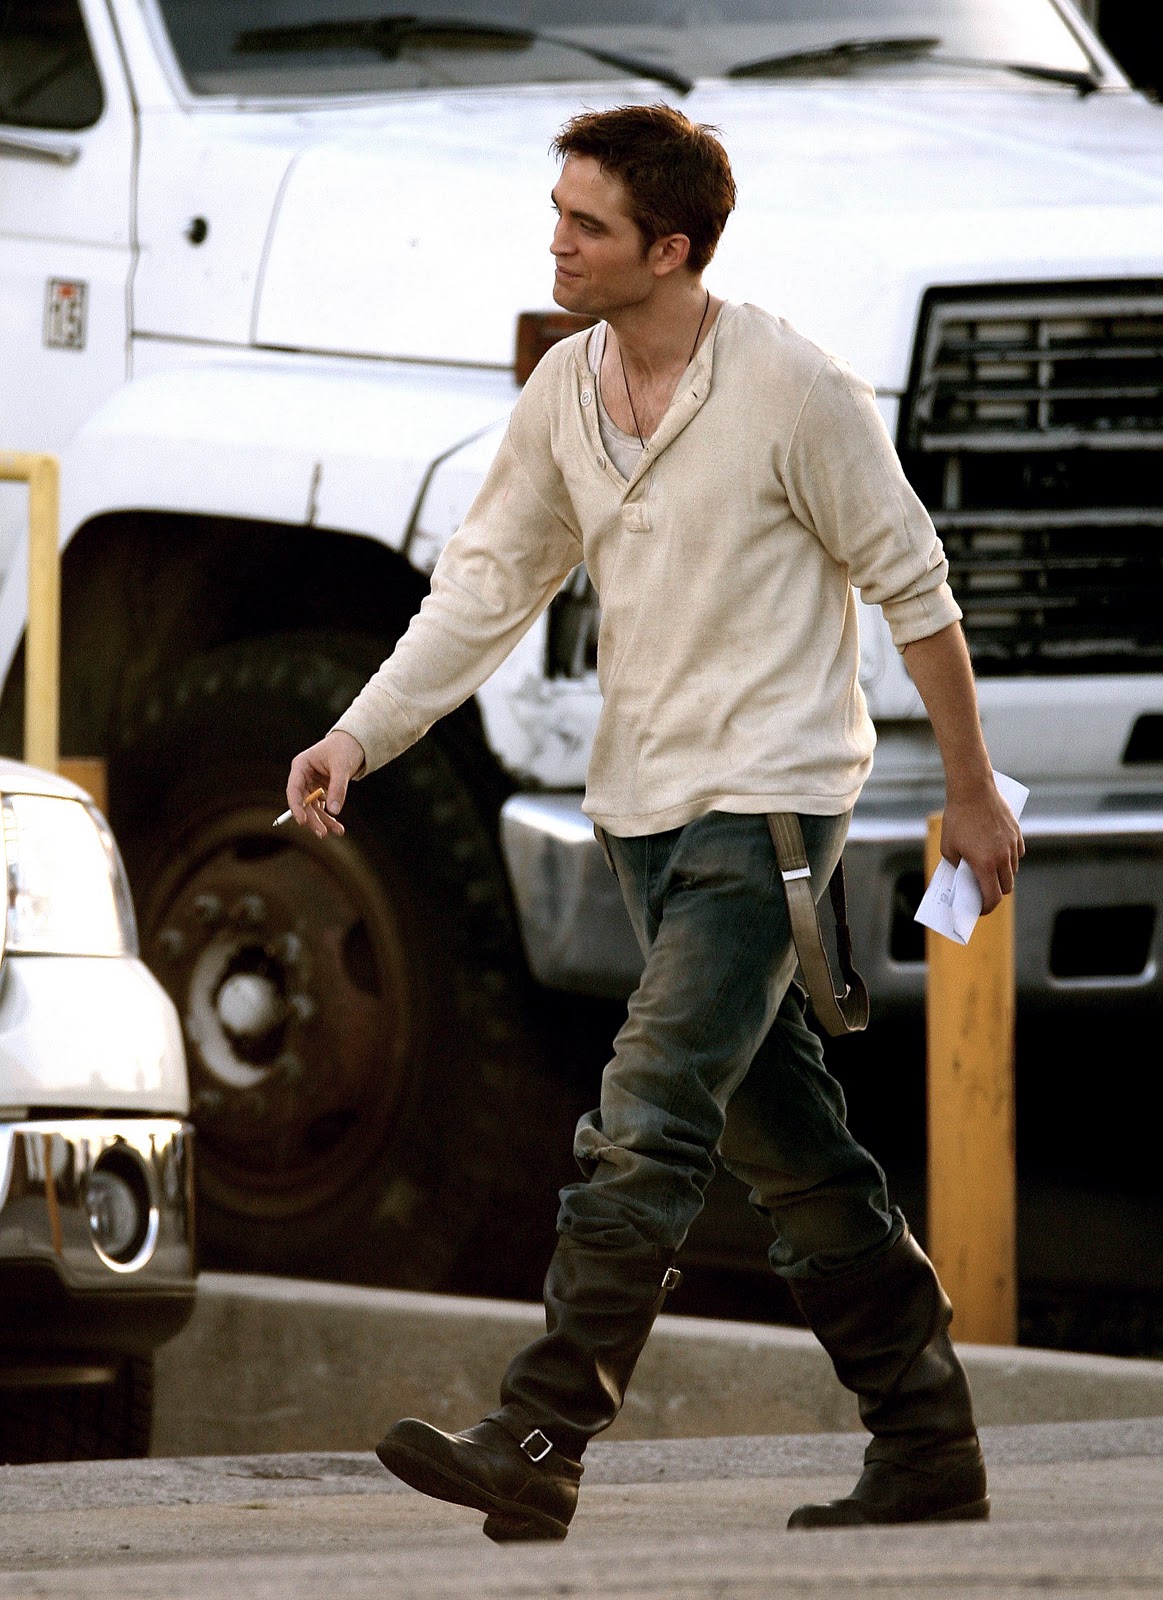 Pattinson Gallery: HQ Pictures of Robert Pattinson on WFE Set Yesterday1163 x 1600